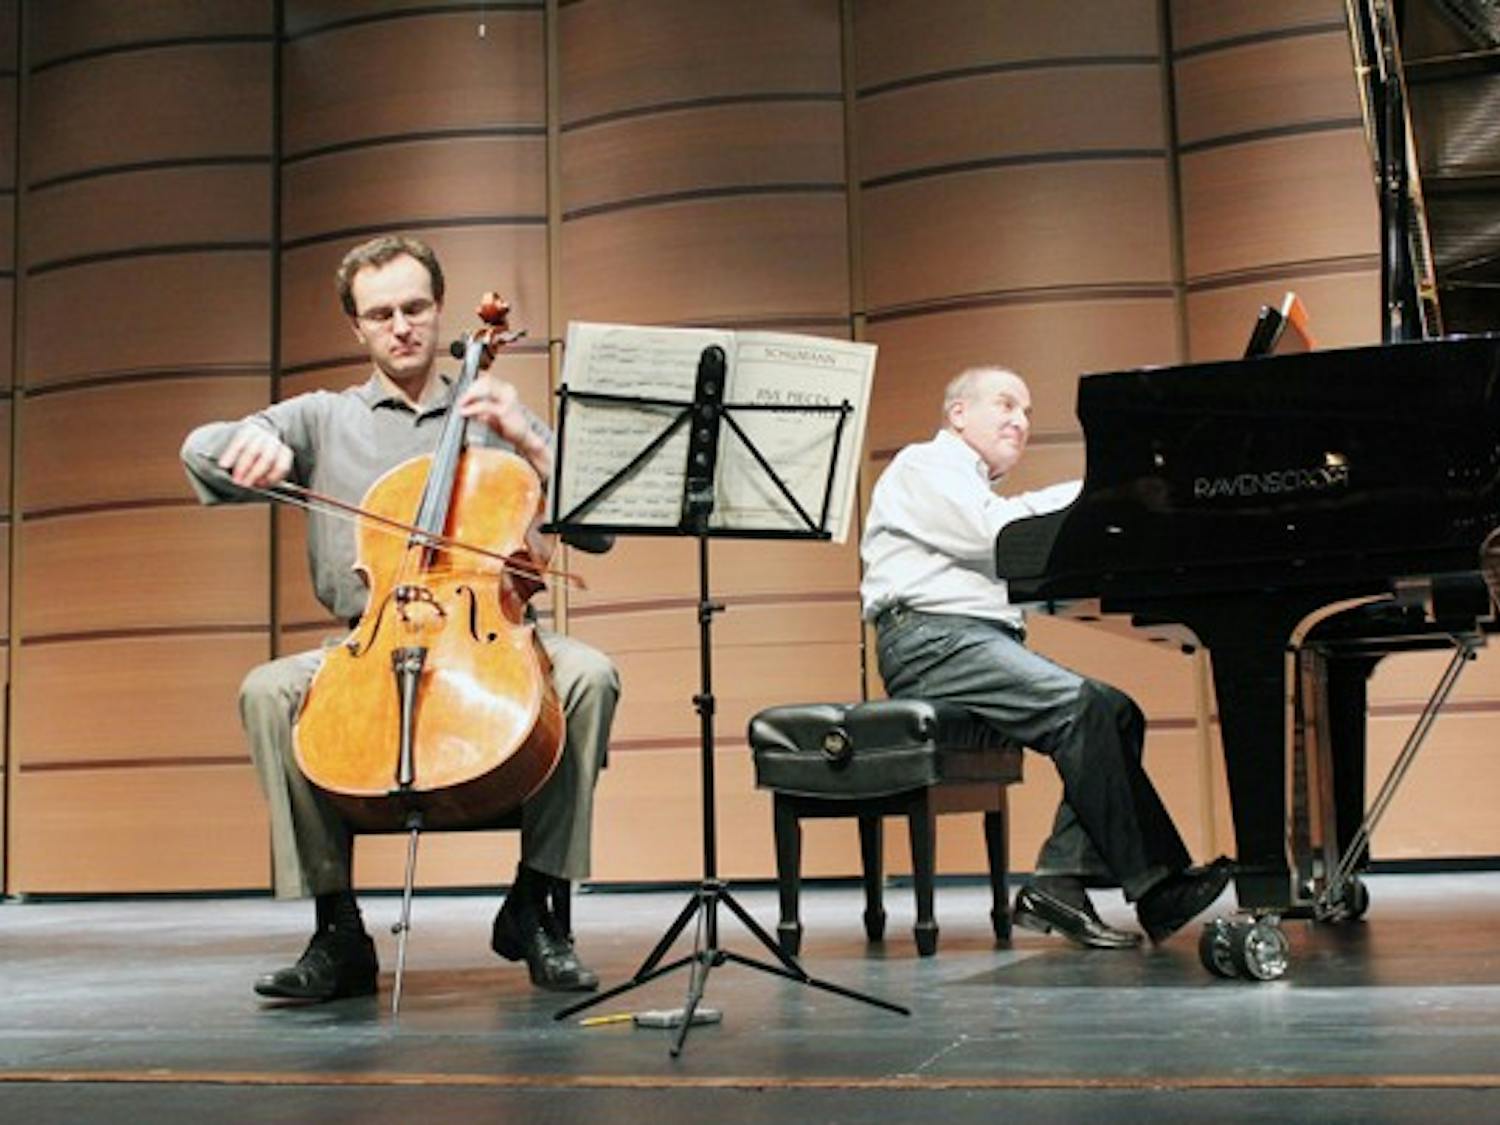 Thomas Landschoot, left, and Martin Katz, right, rehearse for the last performance of the Sonoran Chamber Music Series at the Tempe Center for the Arts. (Photo by Marissa Krings)